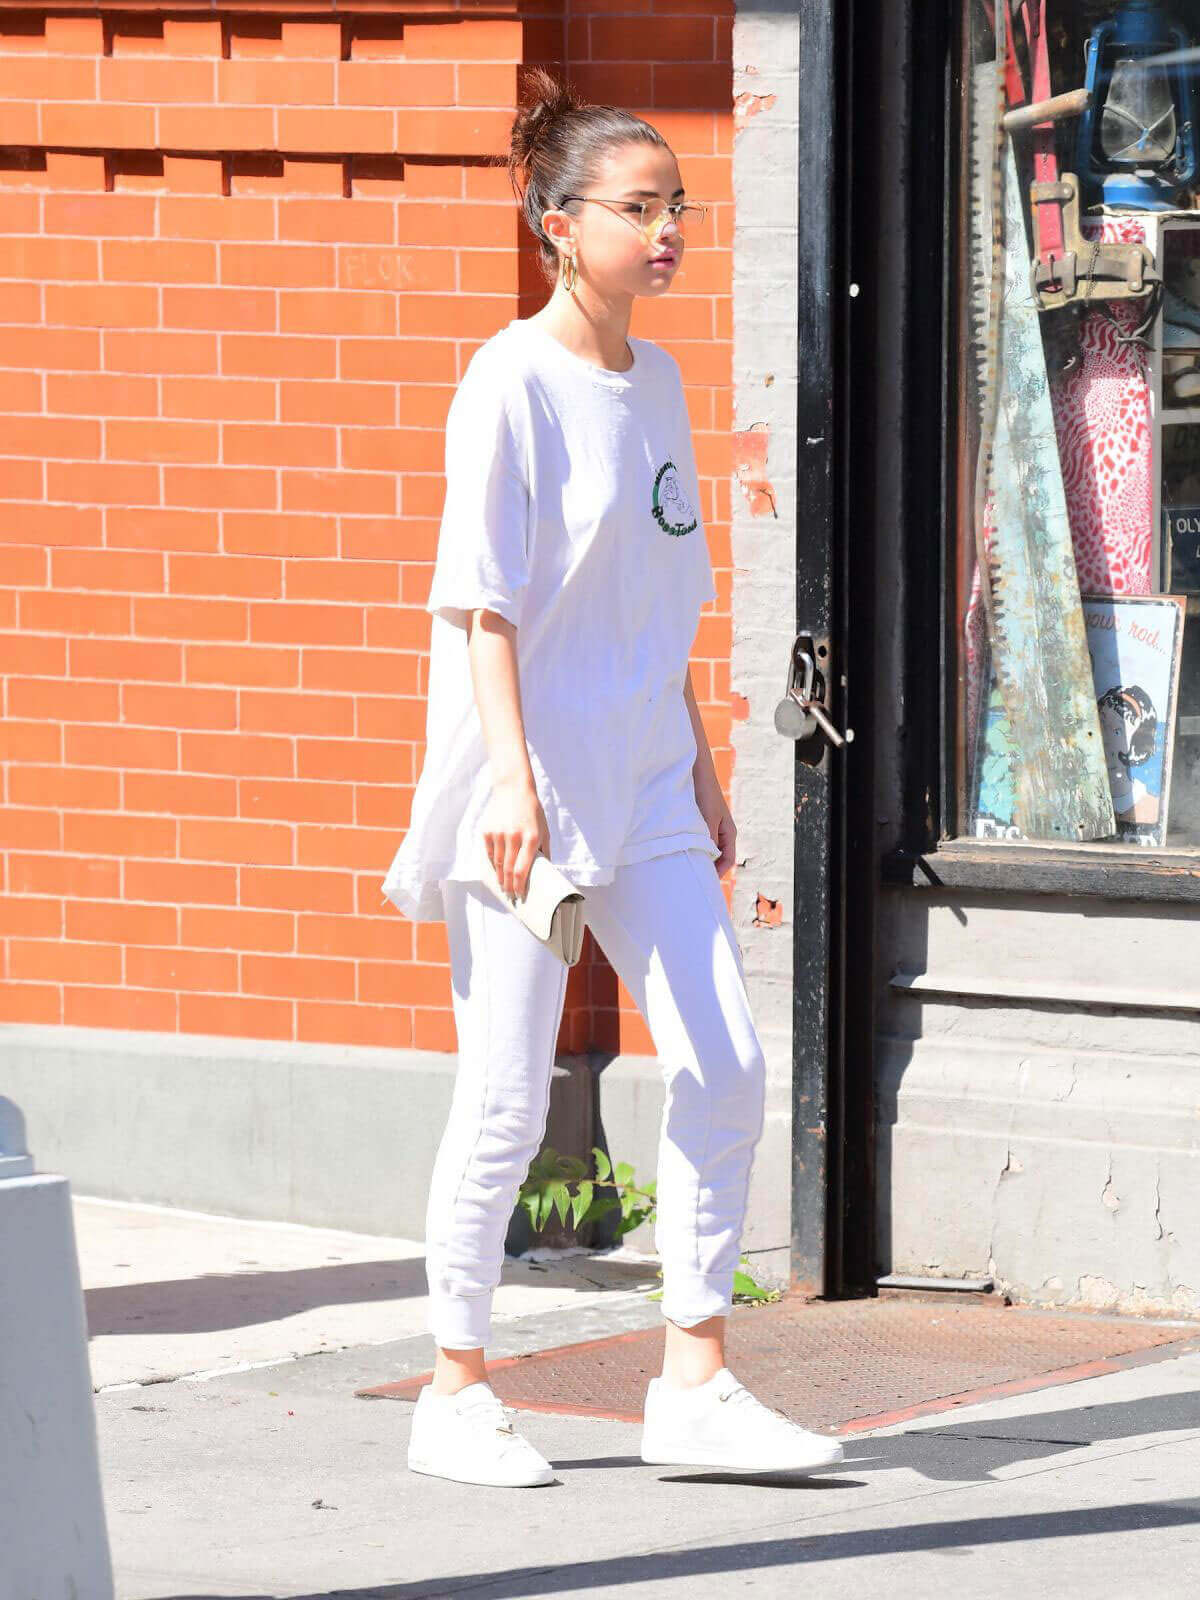 Selena Gomez wears All White Dress Up Out and About in New York